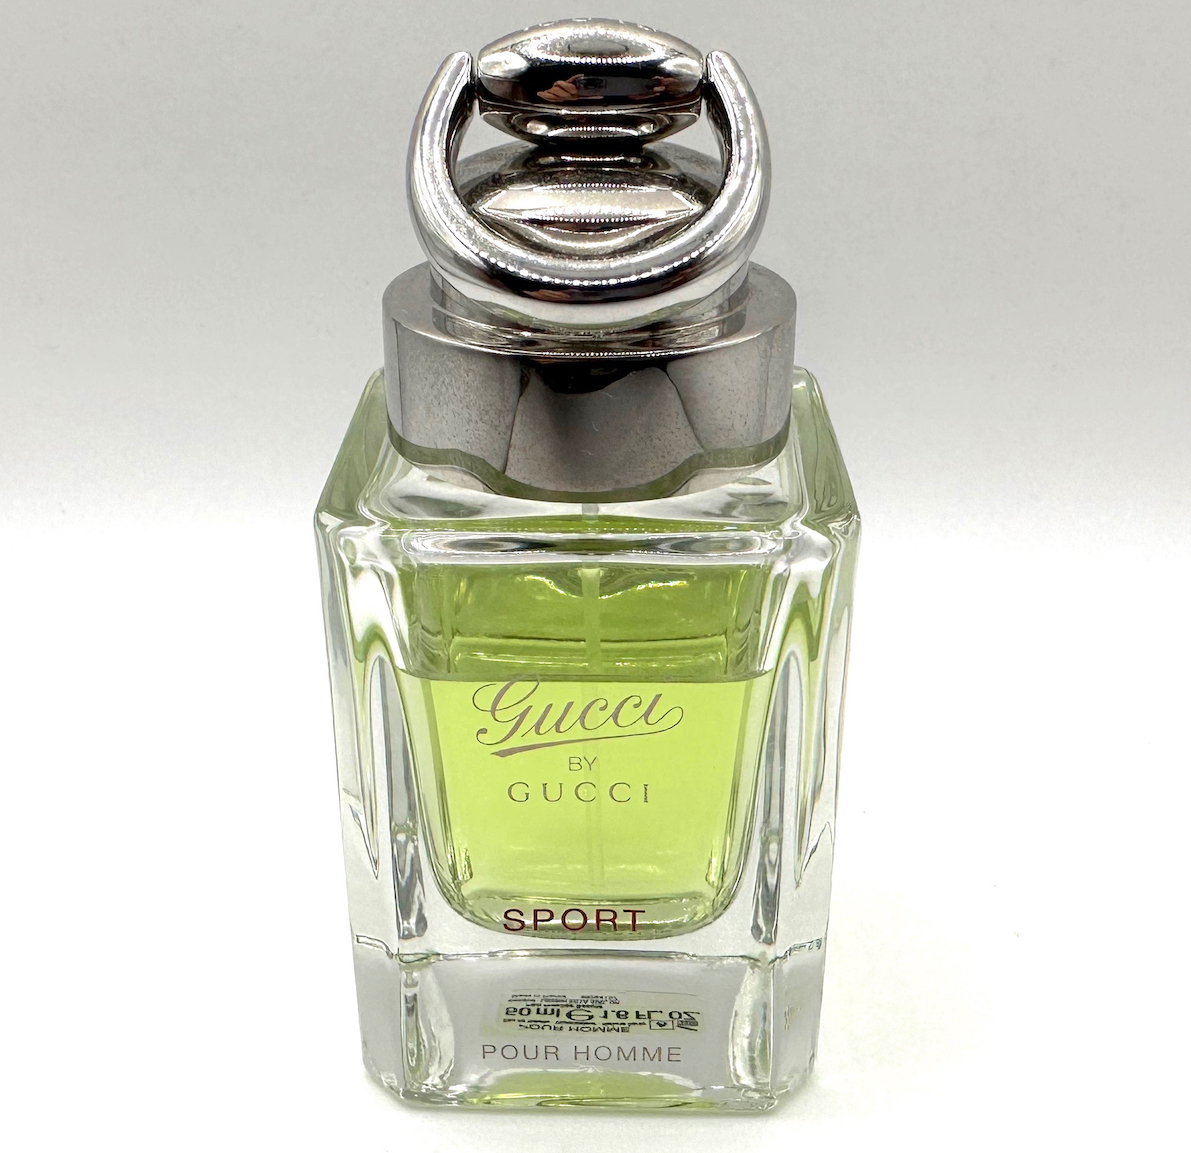 * Gucci perfume *GUCCI BY GUCCI SPORT POUR HOMME 1.6FL.OZ.*50ml * breaking the seal exhibition USED/ remainder amount approximately 80% approximately 40ml/ ground under cold . warehouse storage goods / records out of production / hard-to-find goods 